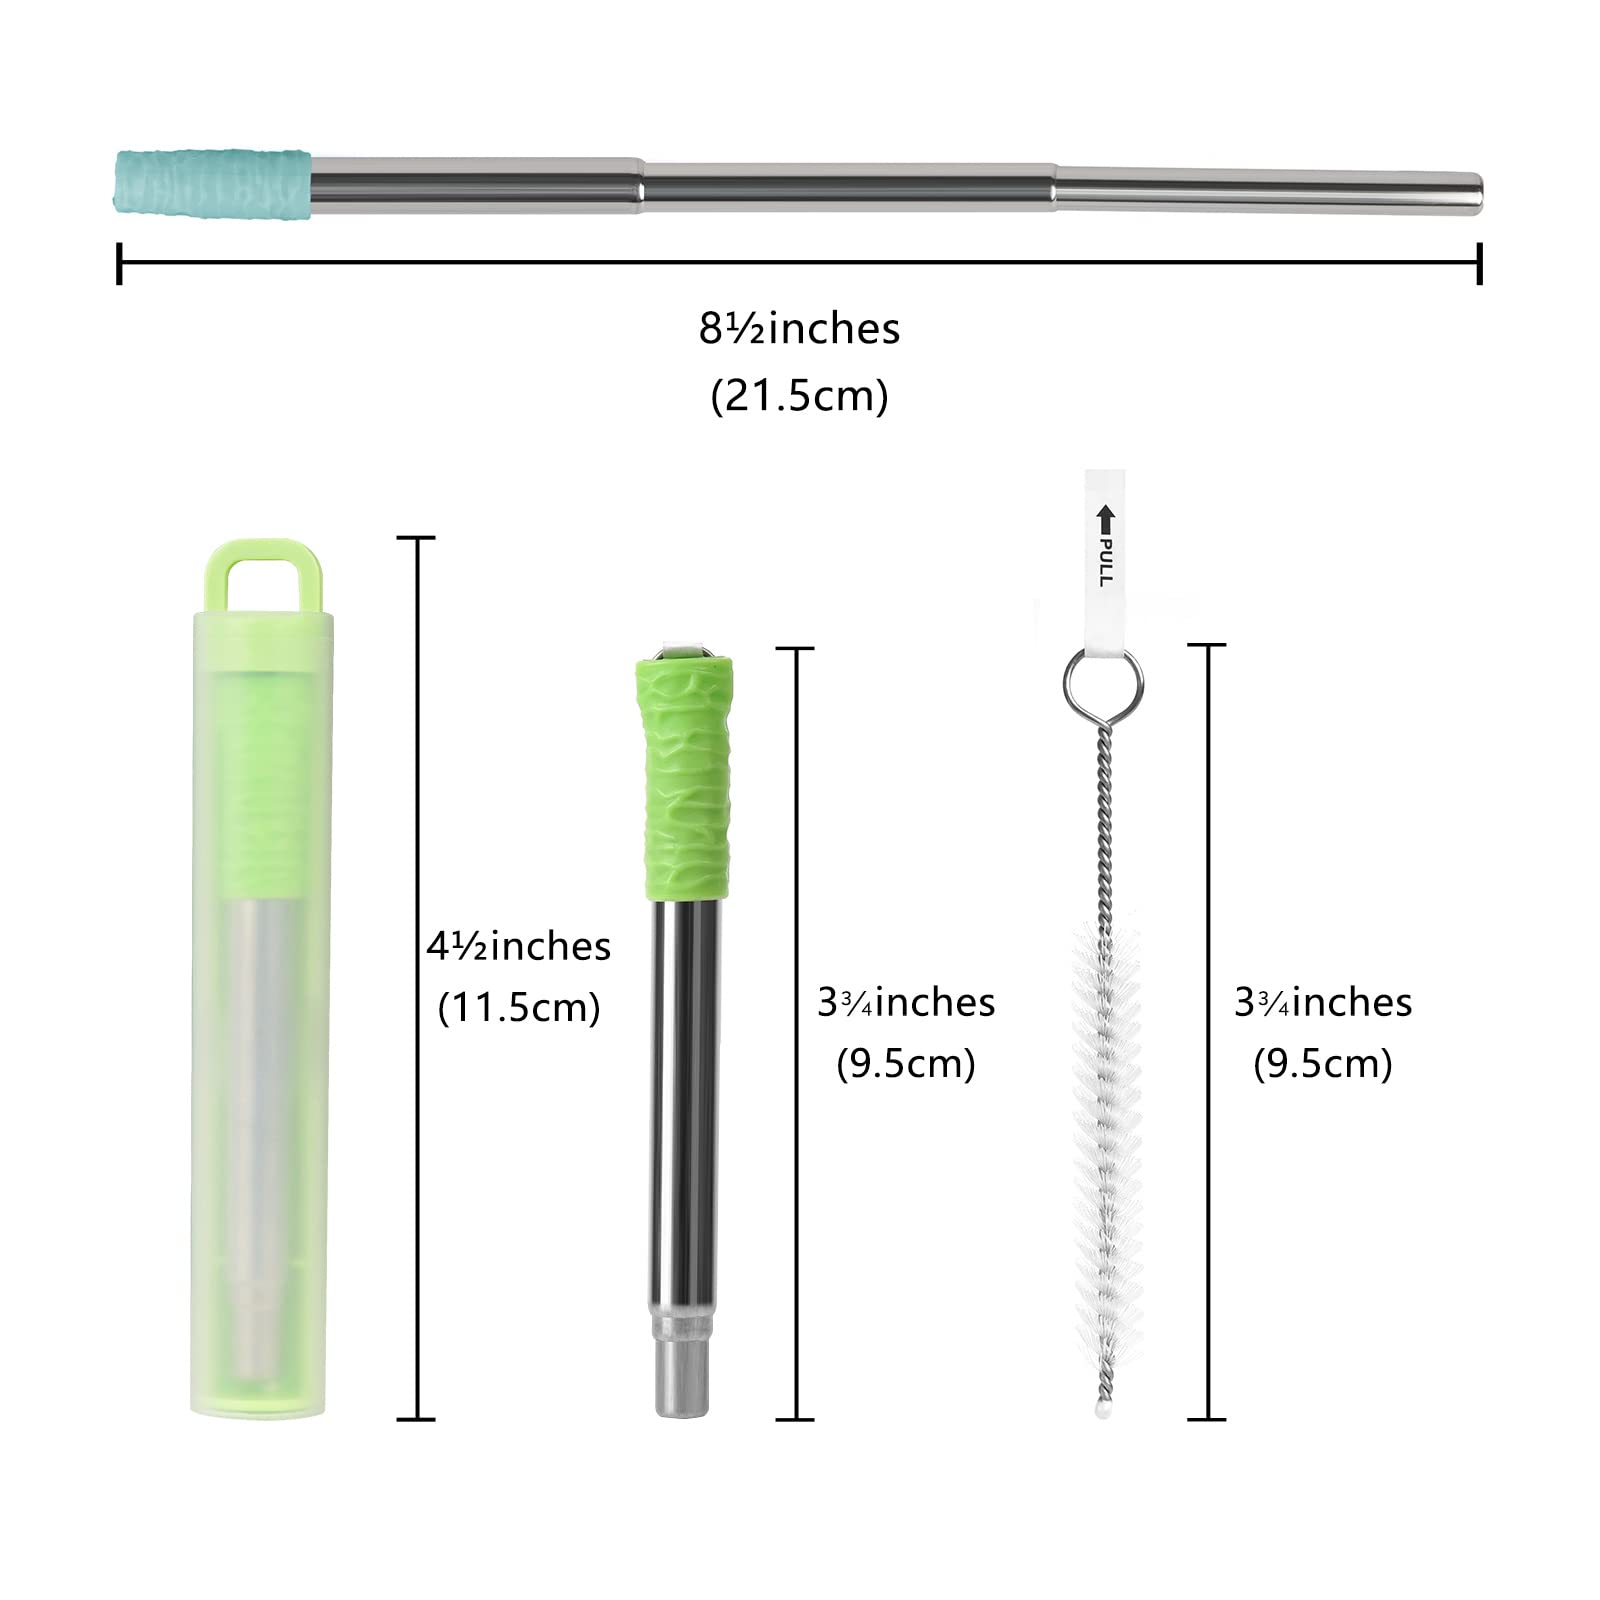 ReignSword 3 Pack Reusable Collapsible Straws with Silicone Tip, Telescopic Portable Stainless Steel Reusable Keychain Drinking Straws with Case, Cleaning Brush, for Travel, School, Picnic